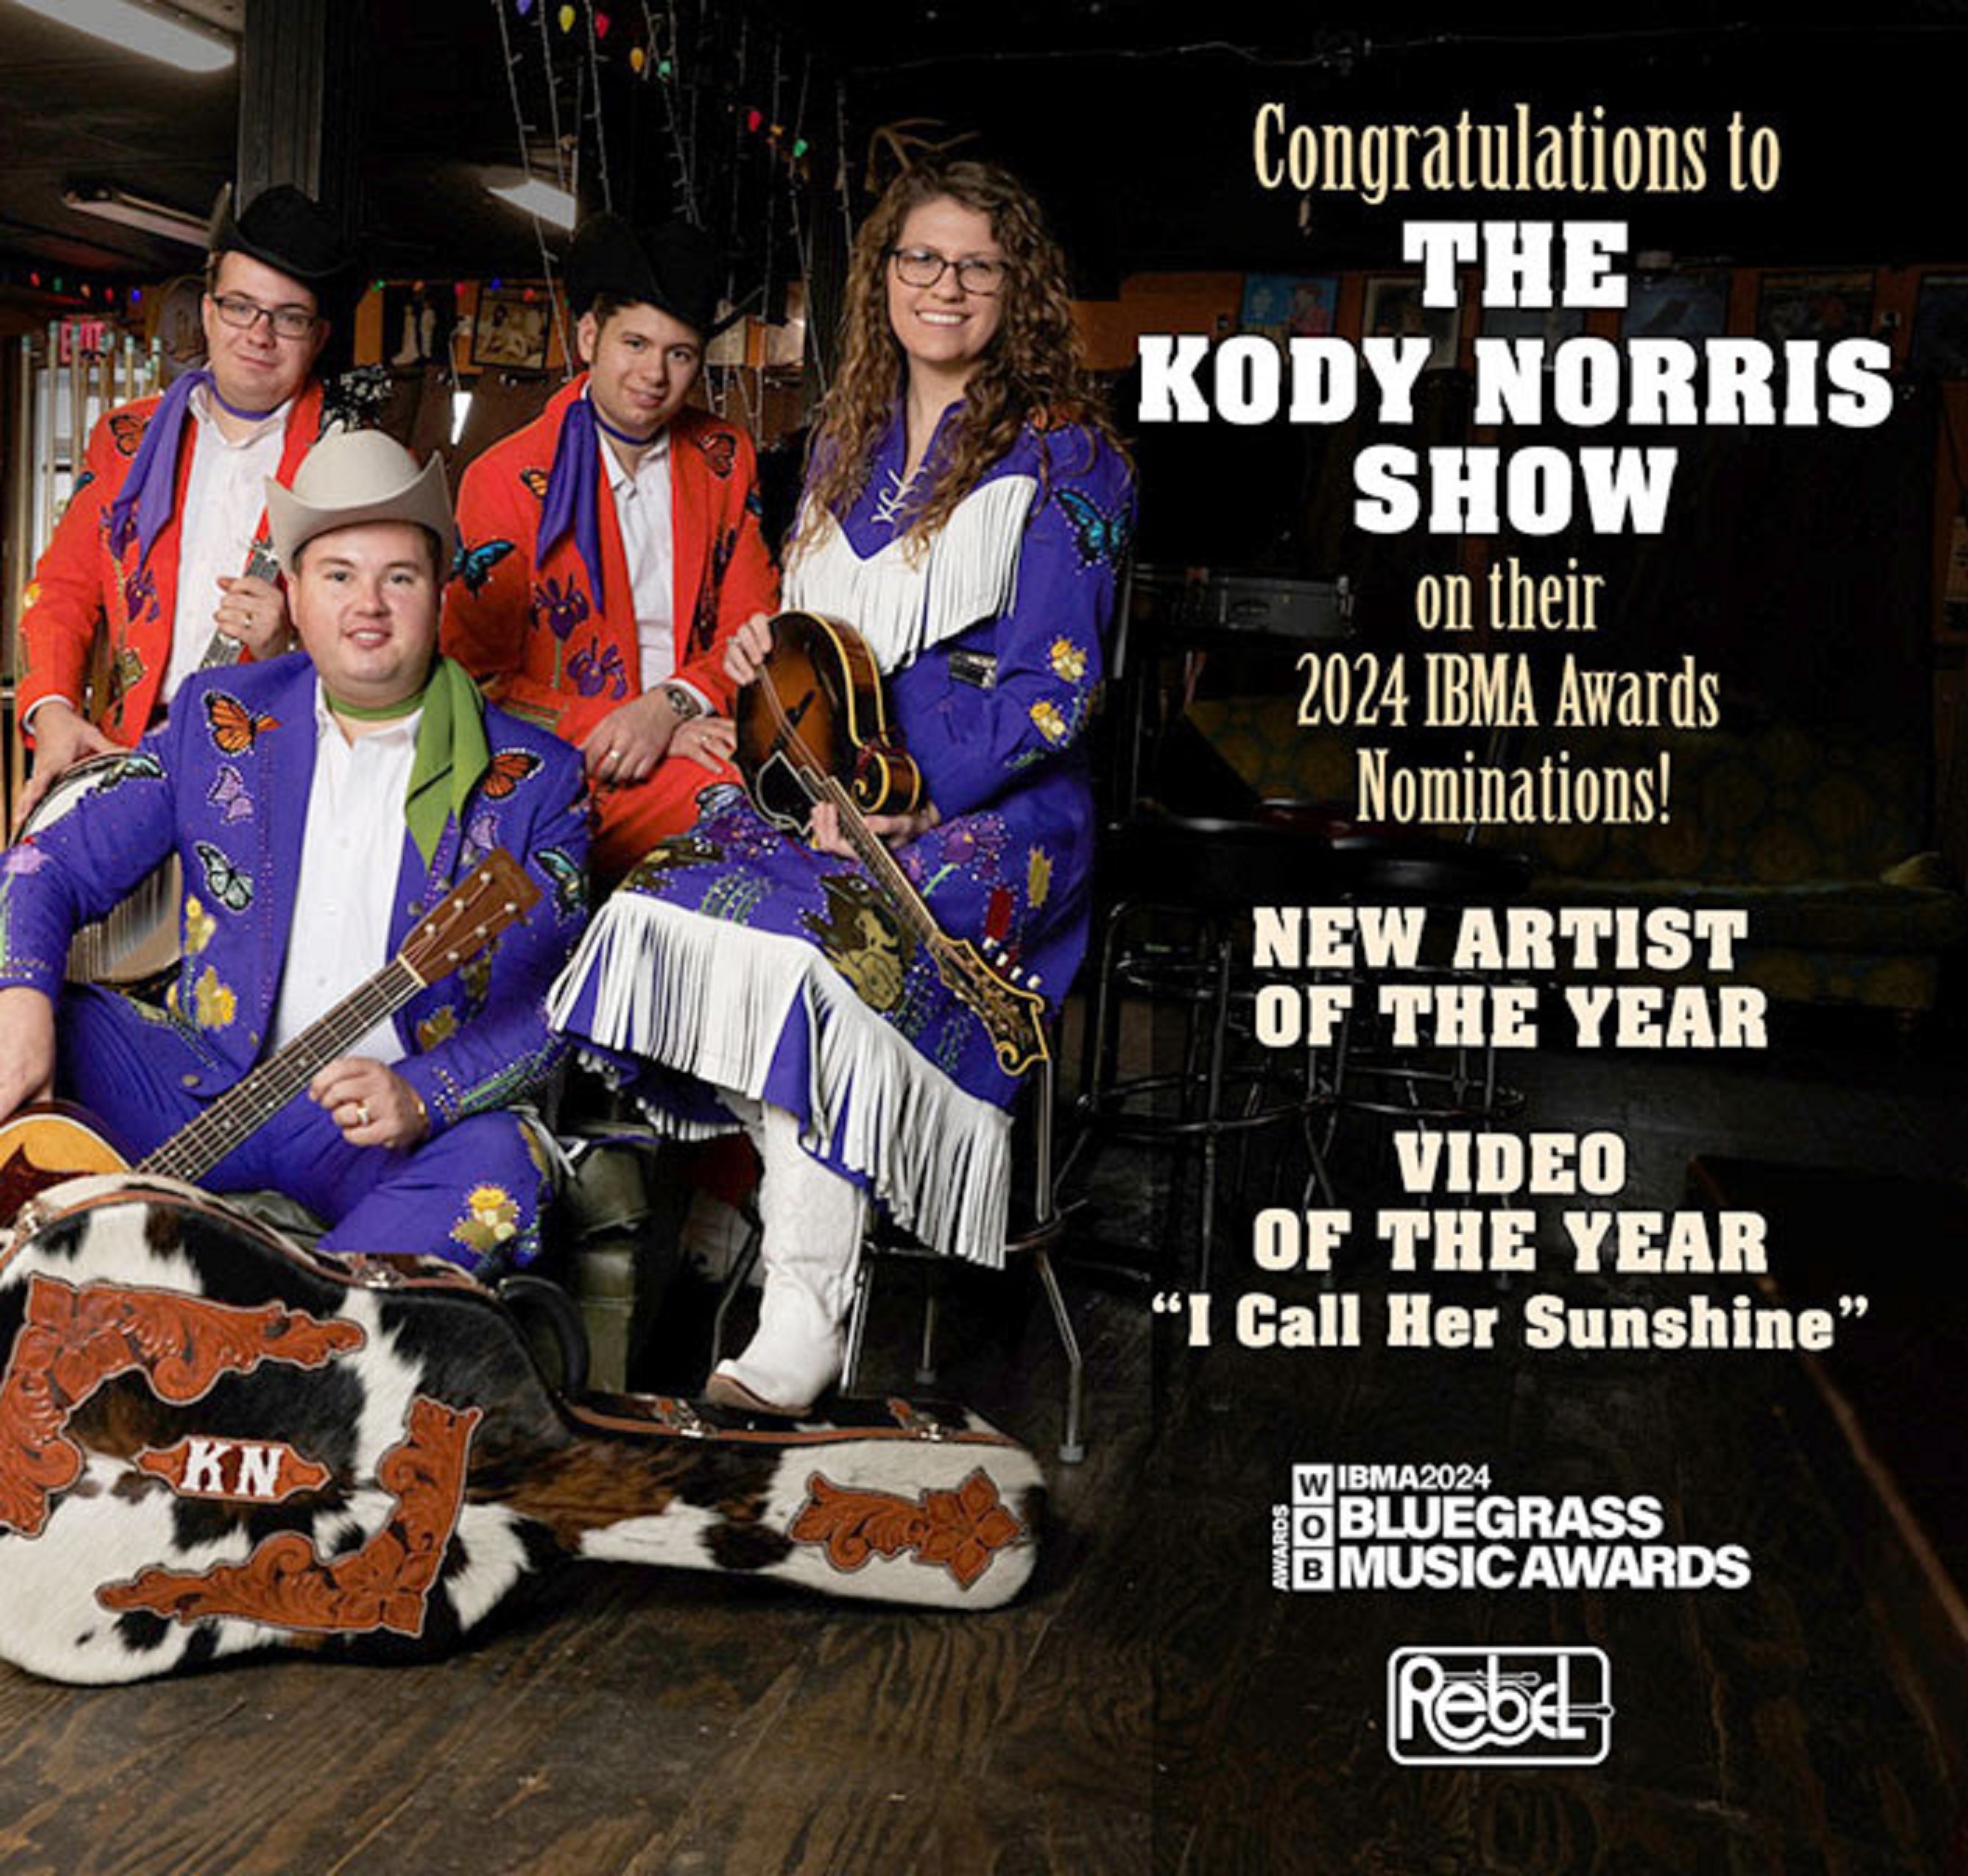 The Kody Norris Show Nominated For Two 2024 IBMA Awards